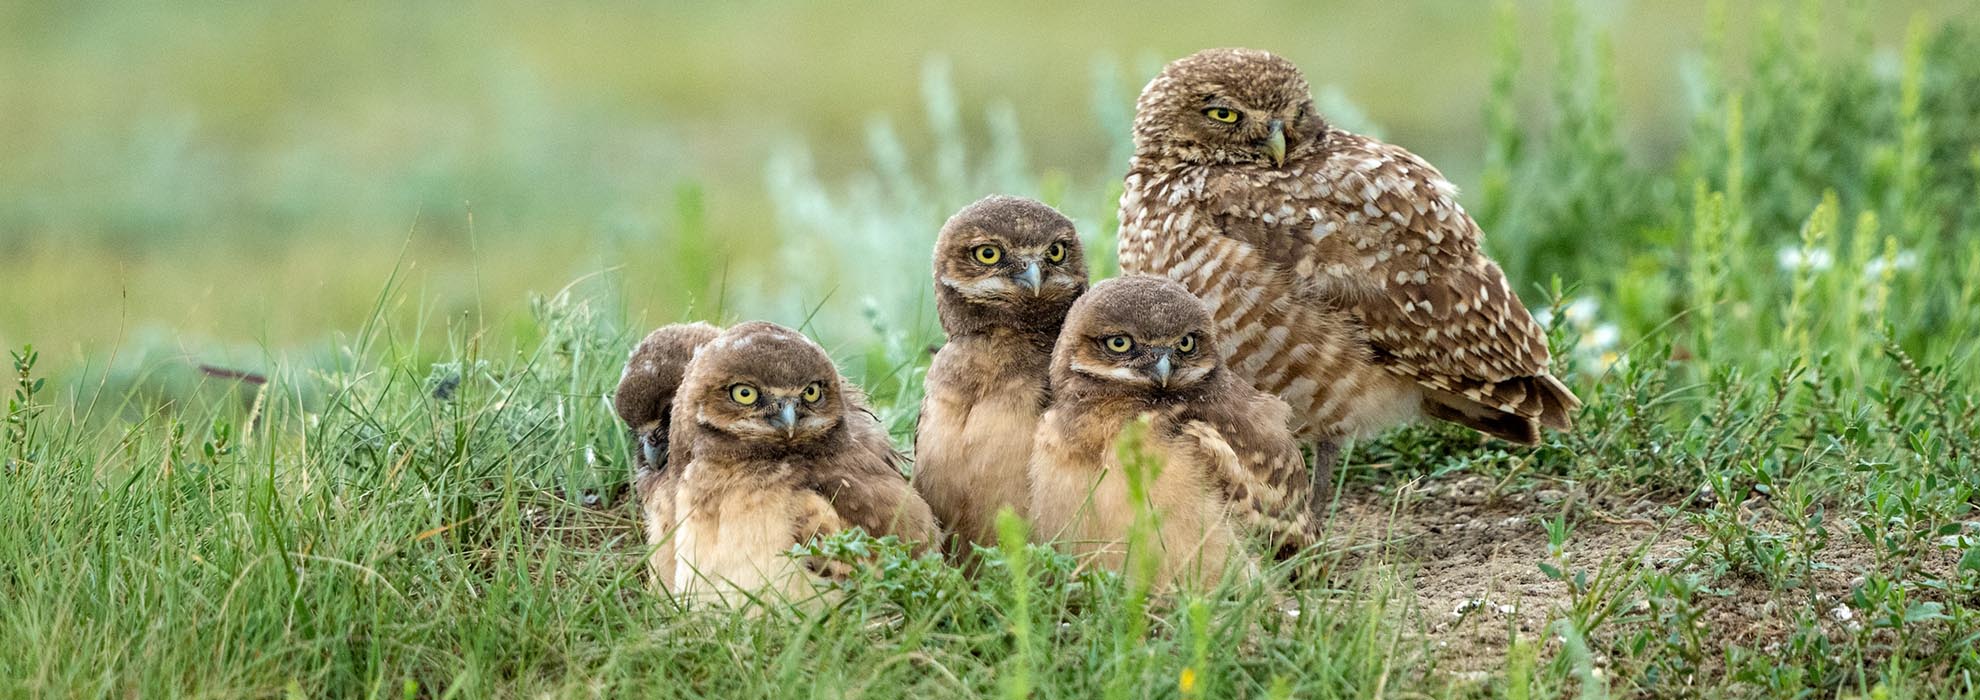 Burrowing Owls in Grasslands National Park - Photo by James R Page